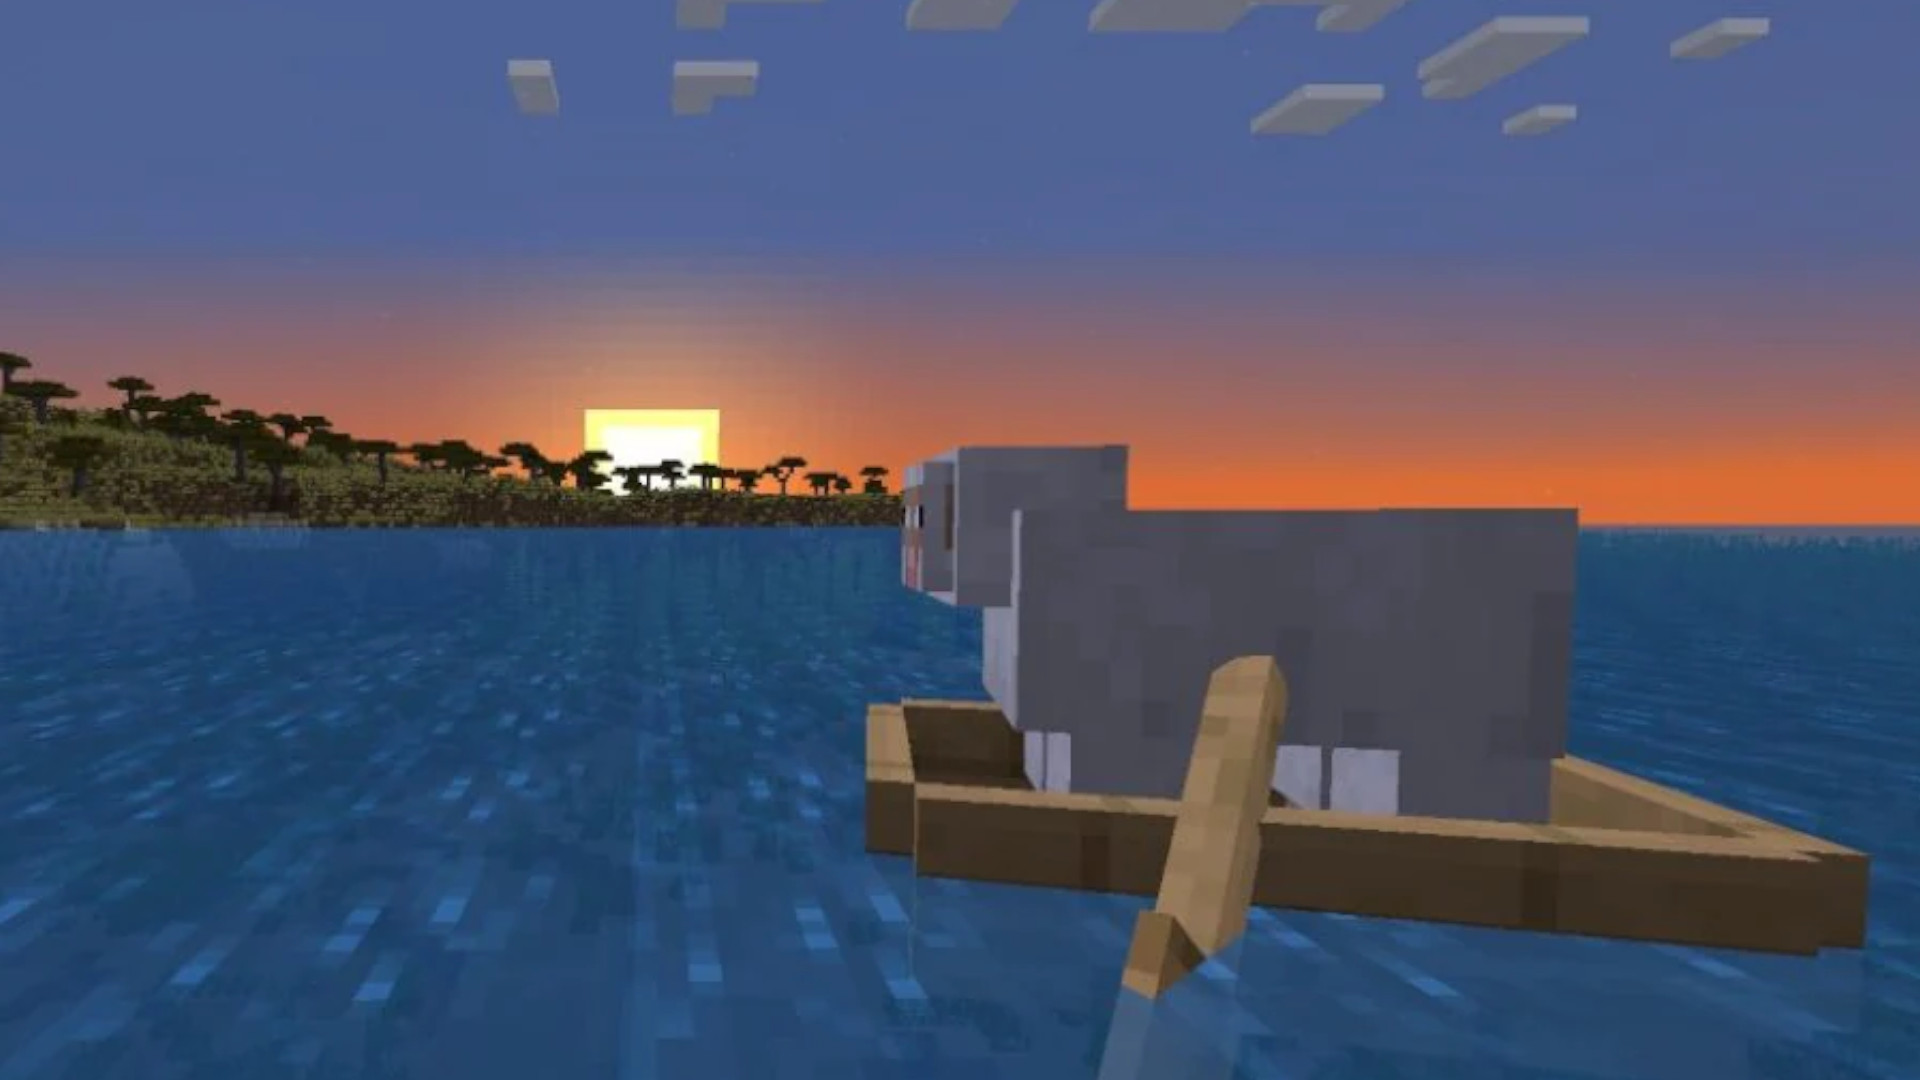 Minecraft’s getting a ‘place feature’ command